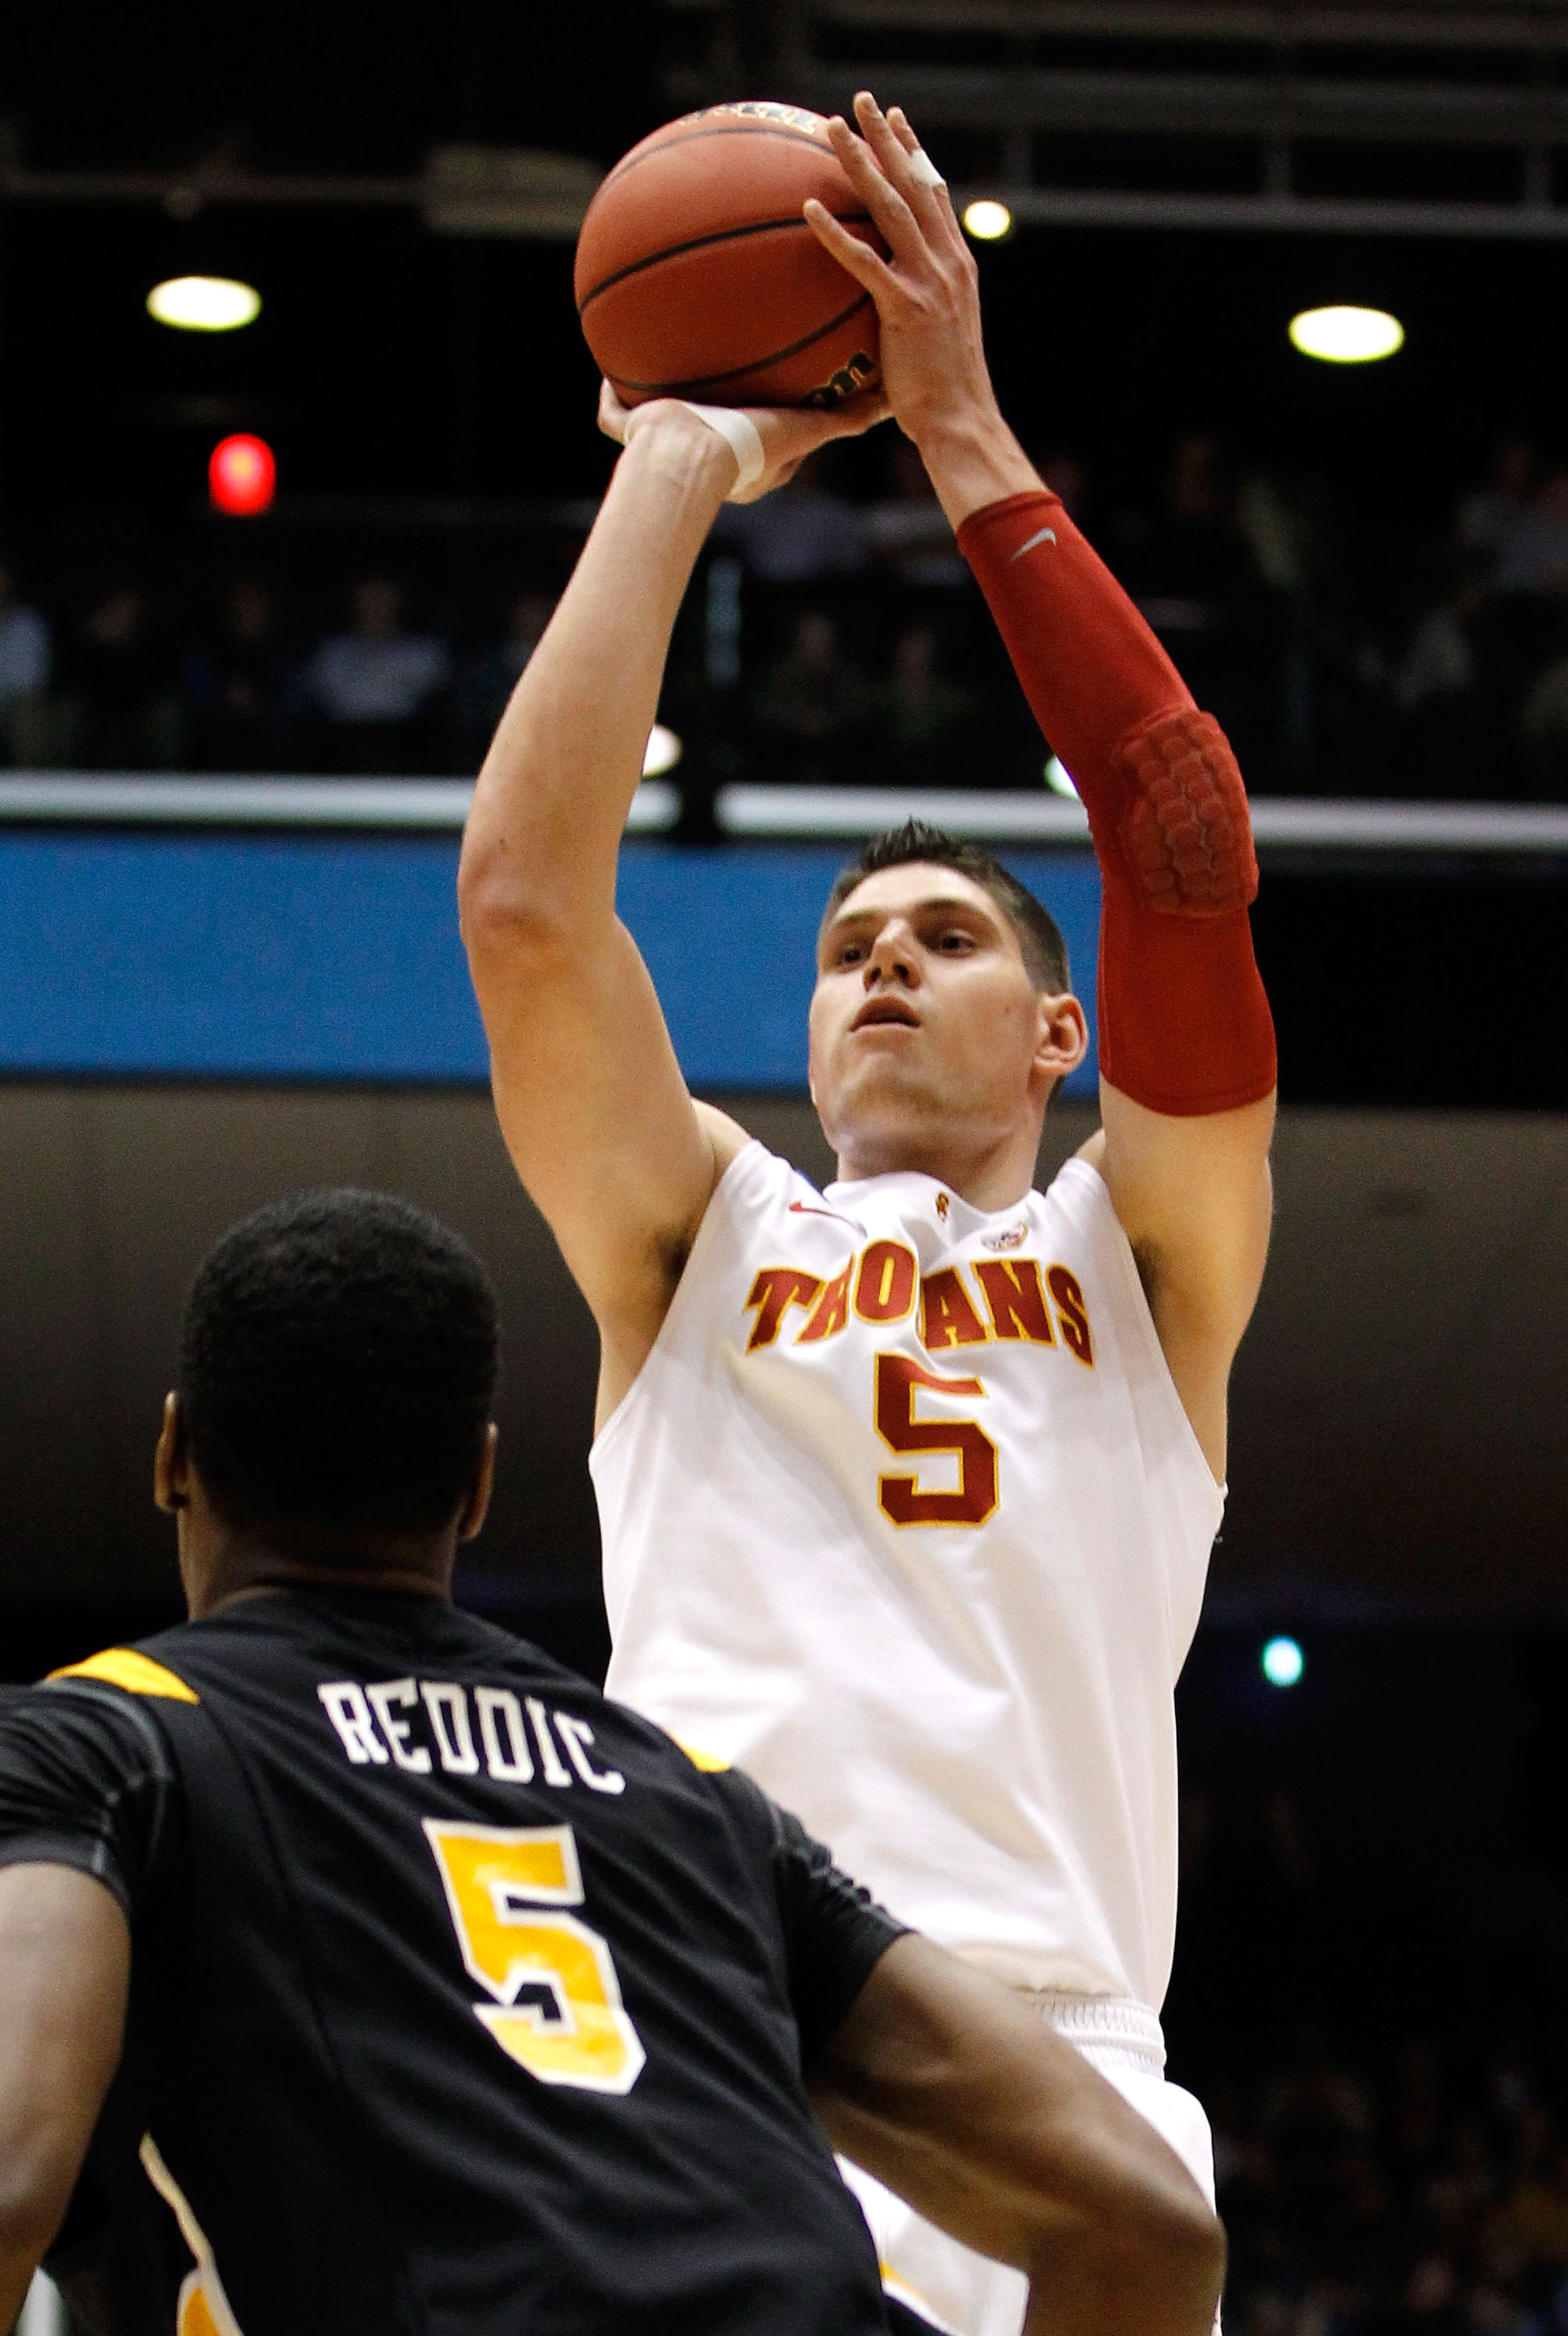 DAYTON, OH - MARCH 16: Nikola Vucevic #5 of the USC Trojans shoots over Juvonte Reddic #5 of the Virginia Commonwealth Rams during the first round of the 2011 NCAA men's basketball tournament at UD Arena on March 16, 2011 in Dayton, Ohio.  (Photo by Grego